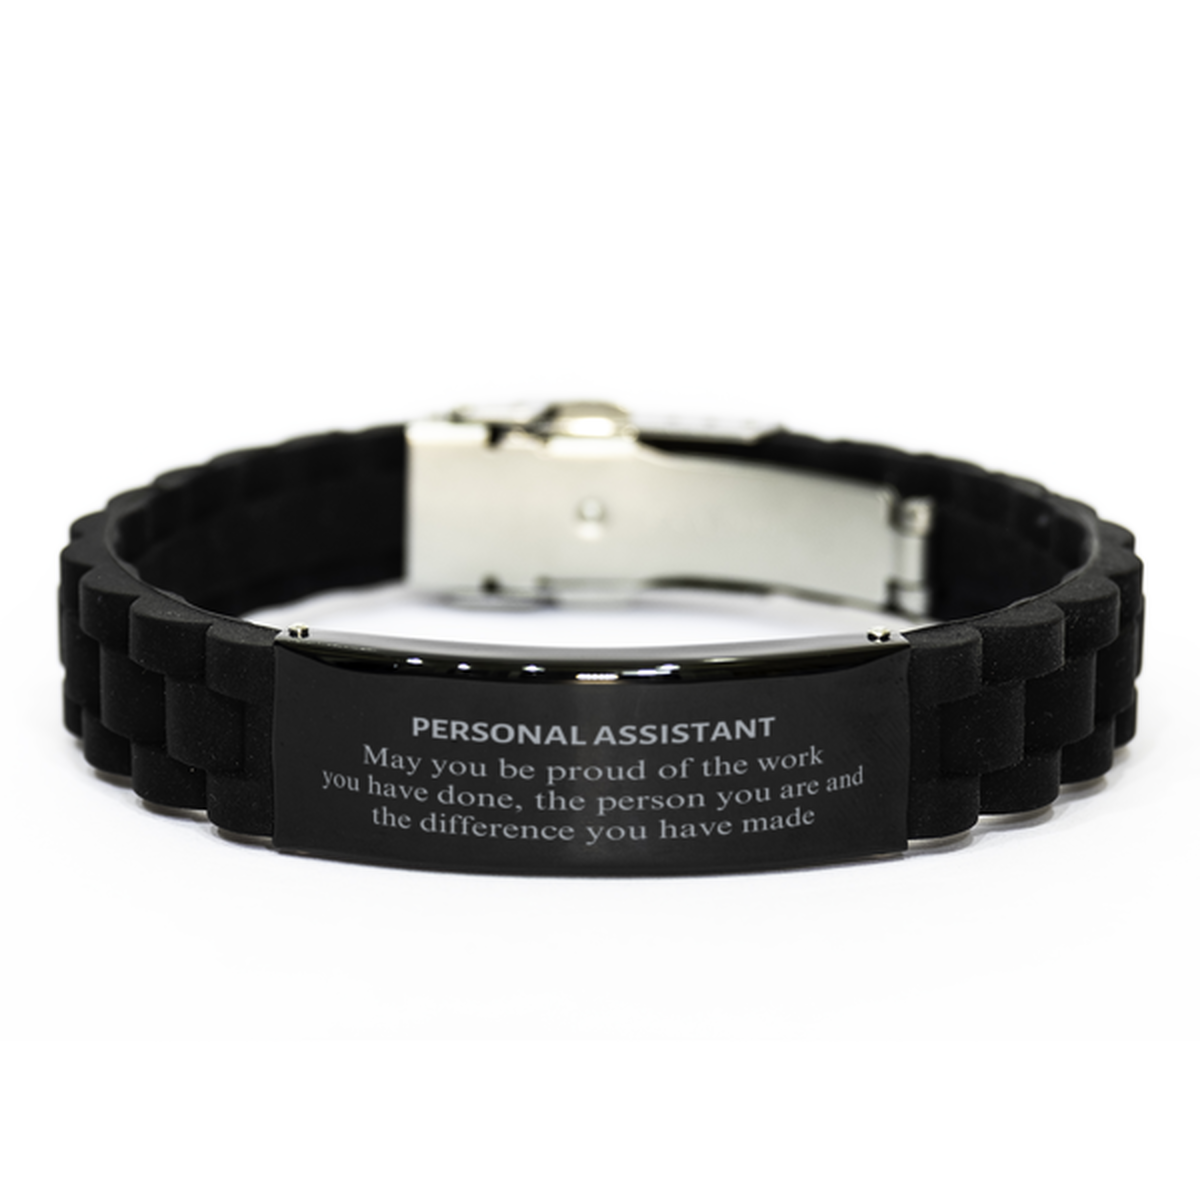 Personal Assistant May you be proud of the work you have done, Retirement Personal Assistant Black Glidelock Clasp Bracelet for Colleague Appreciation Gifts Amazing for Personal Assistant